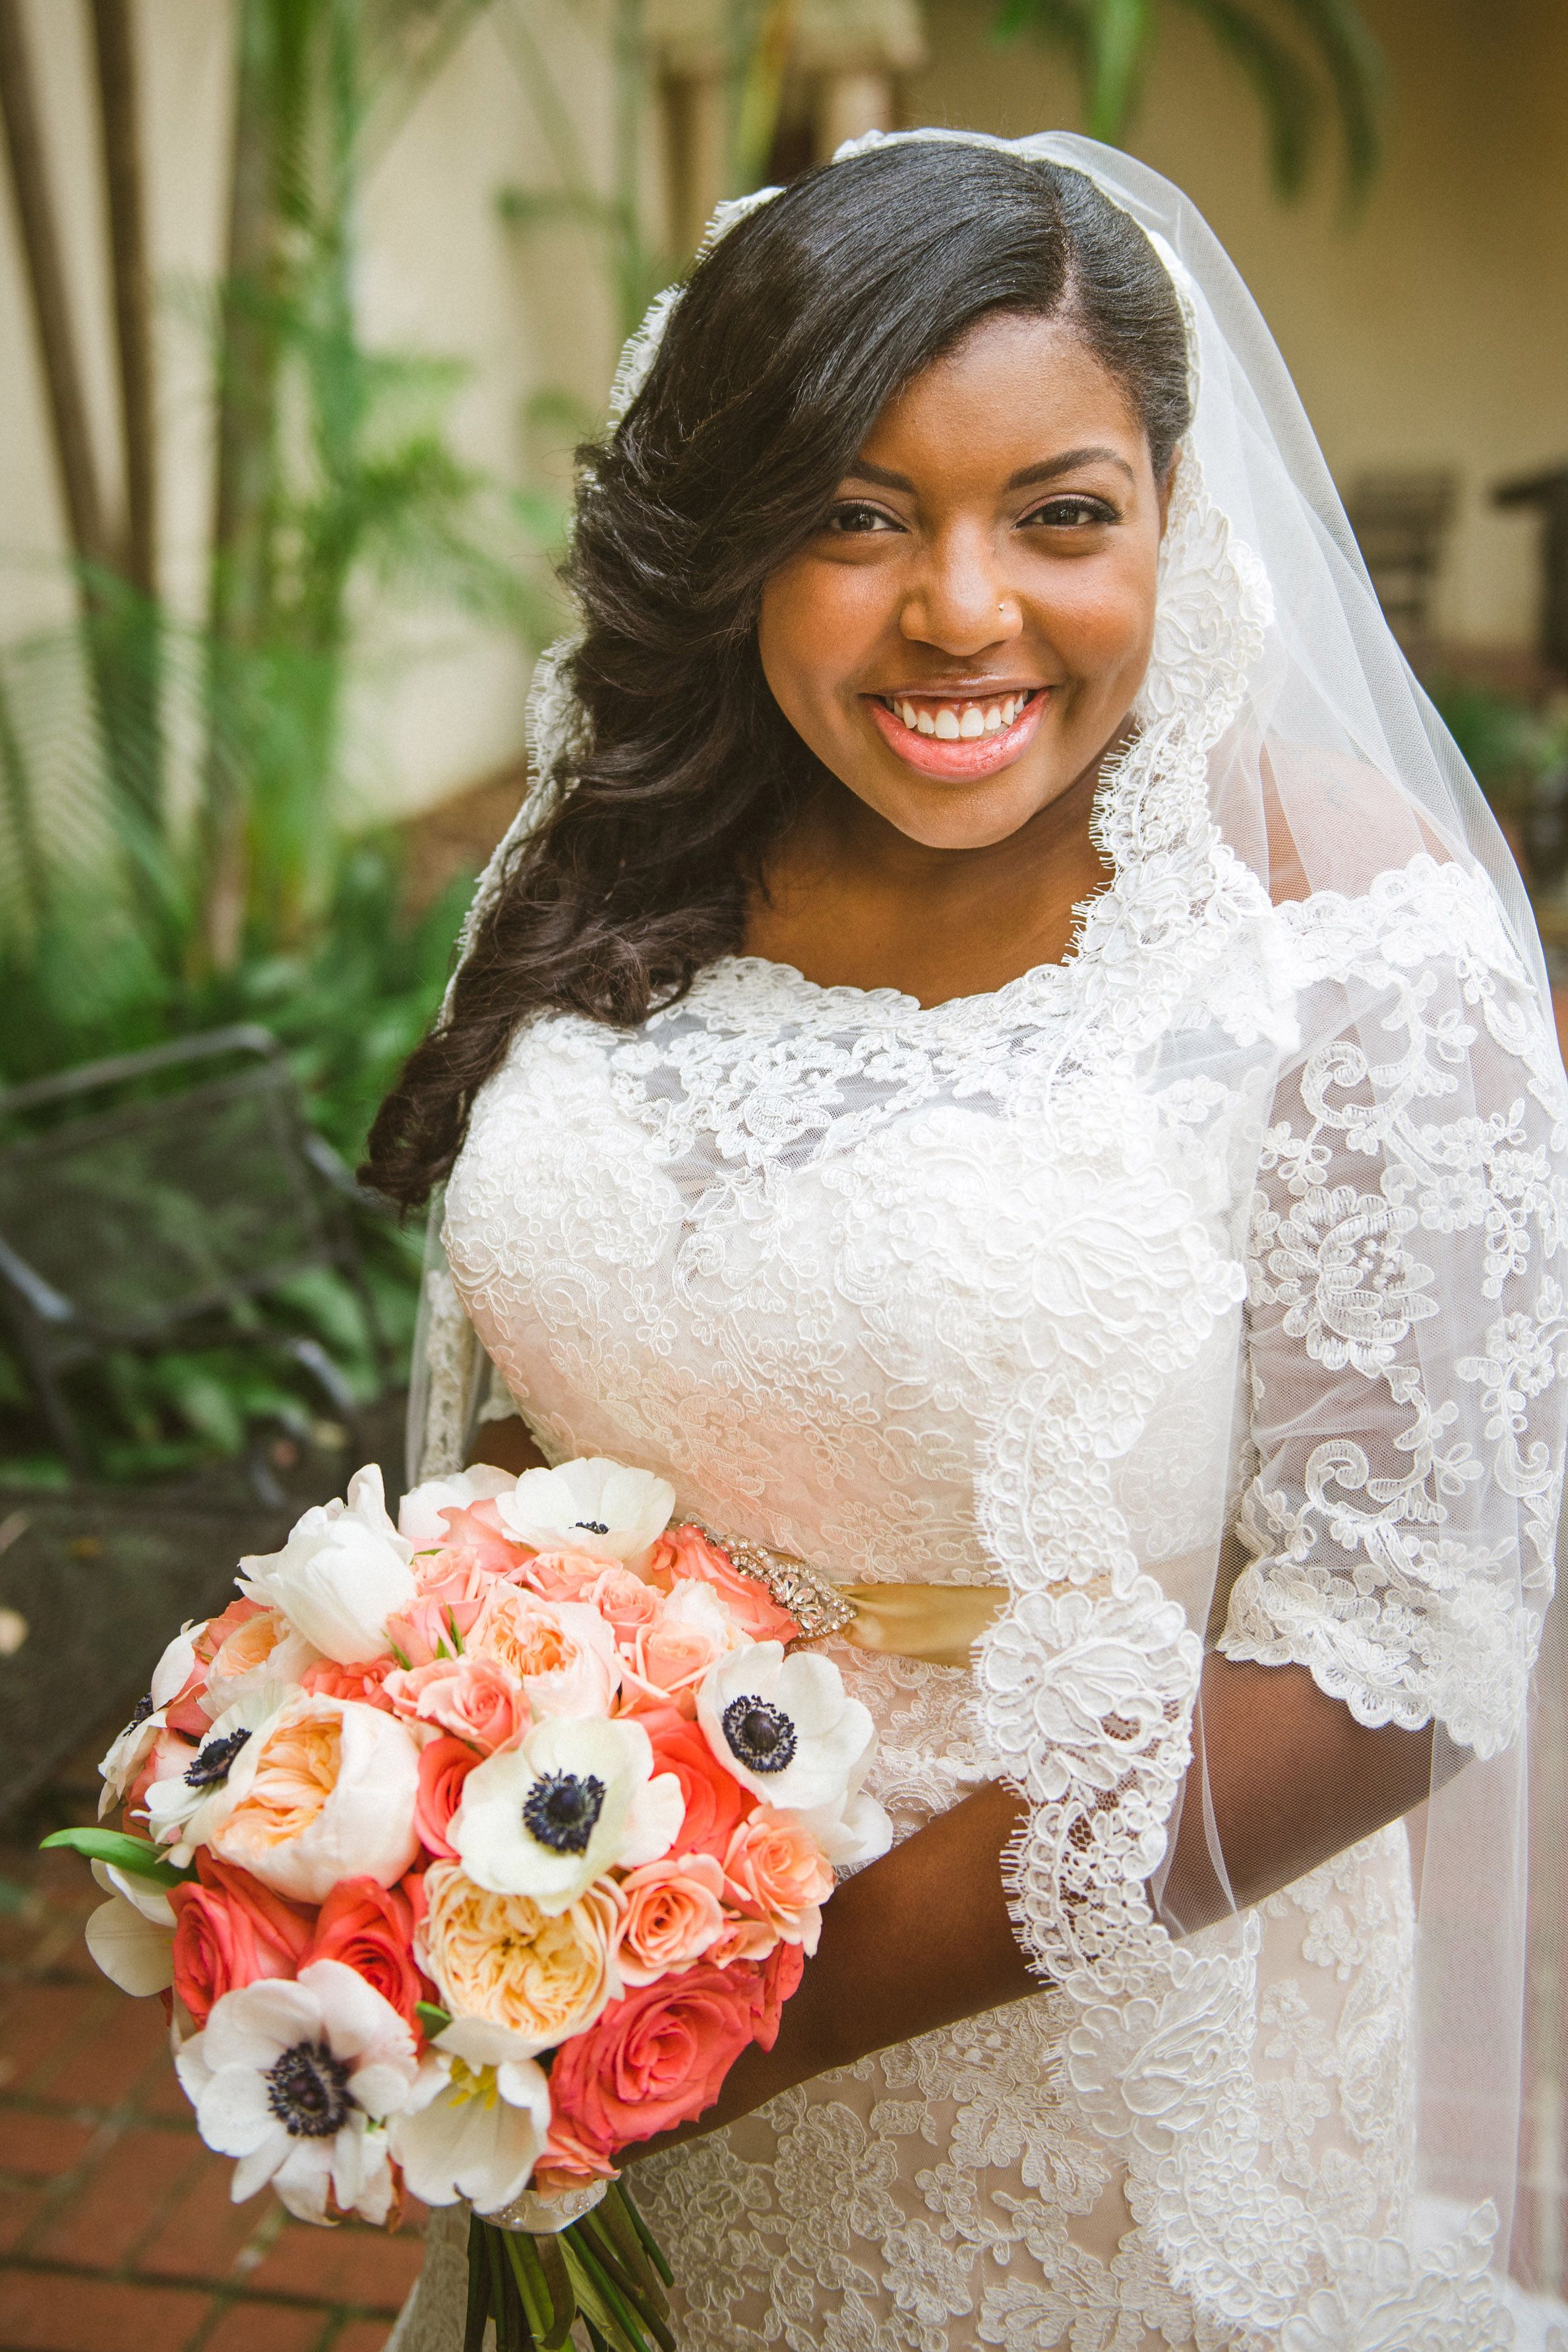 36 Wedding Hairstyle Ideas for Black Women  hitchedcouk